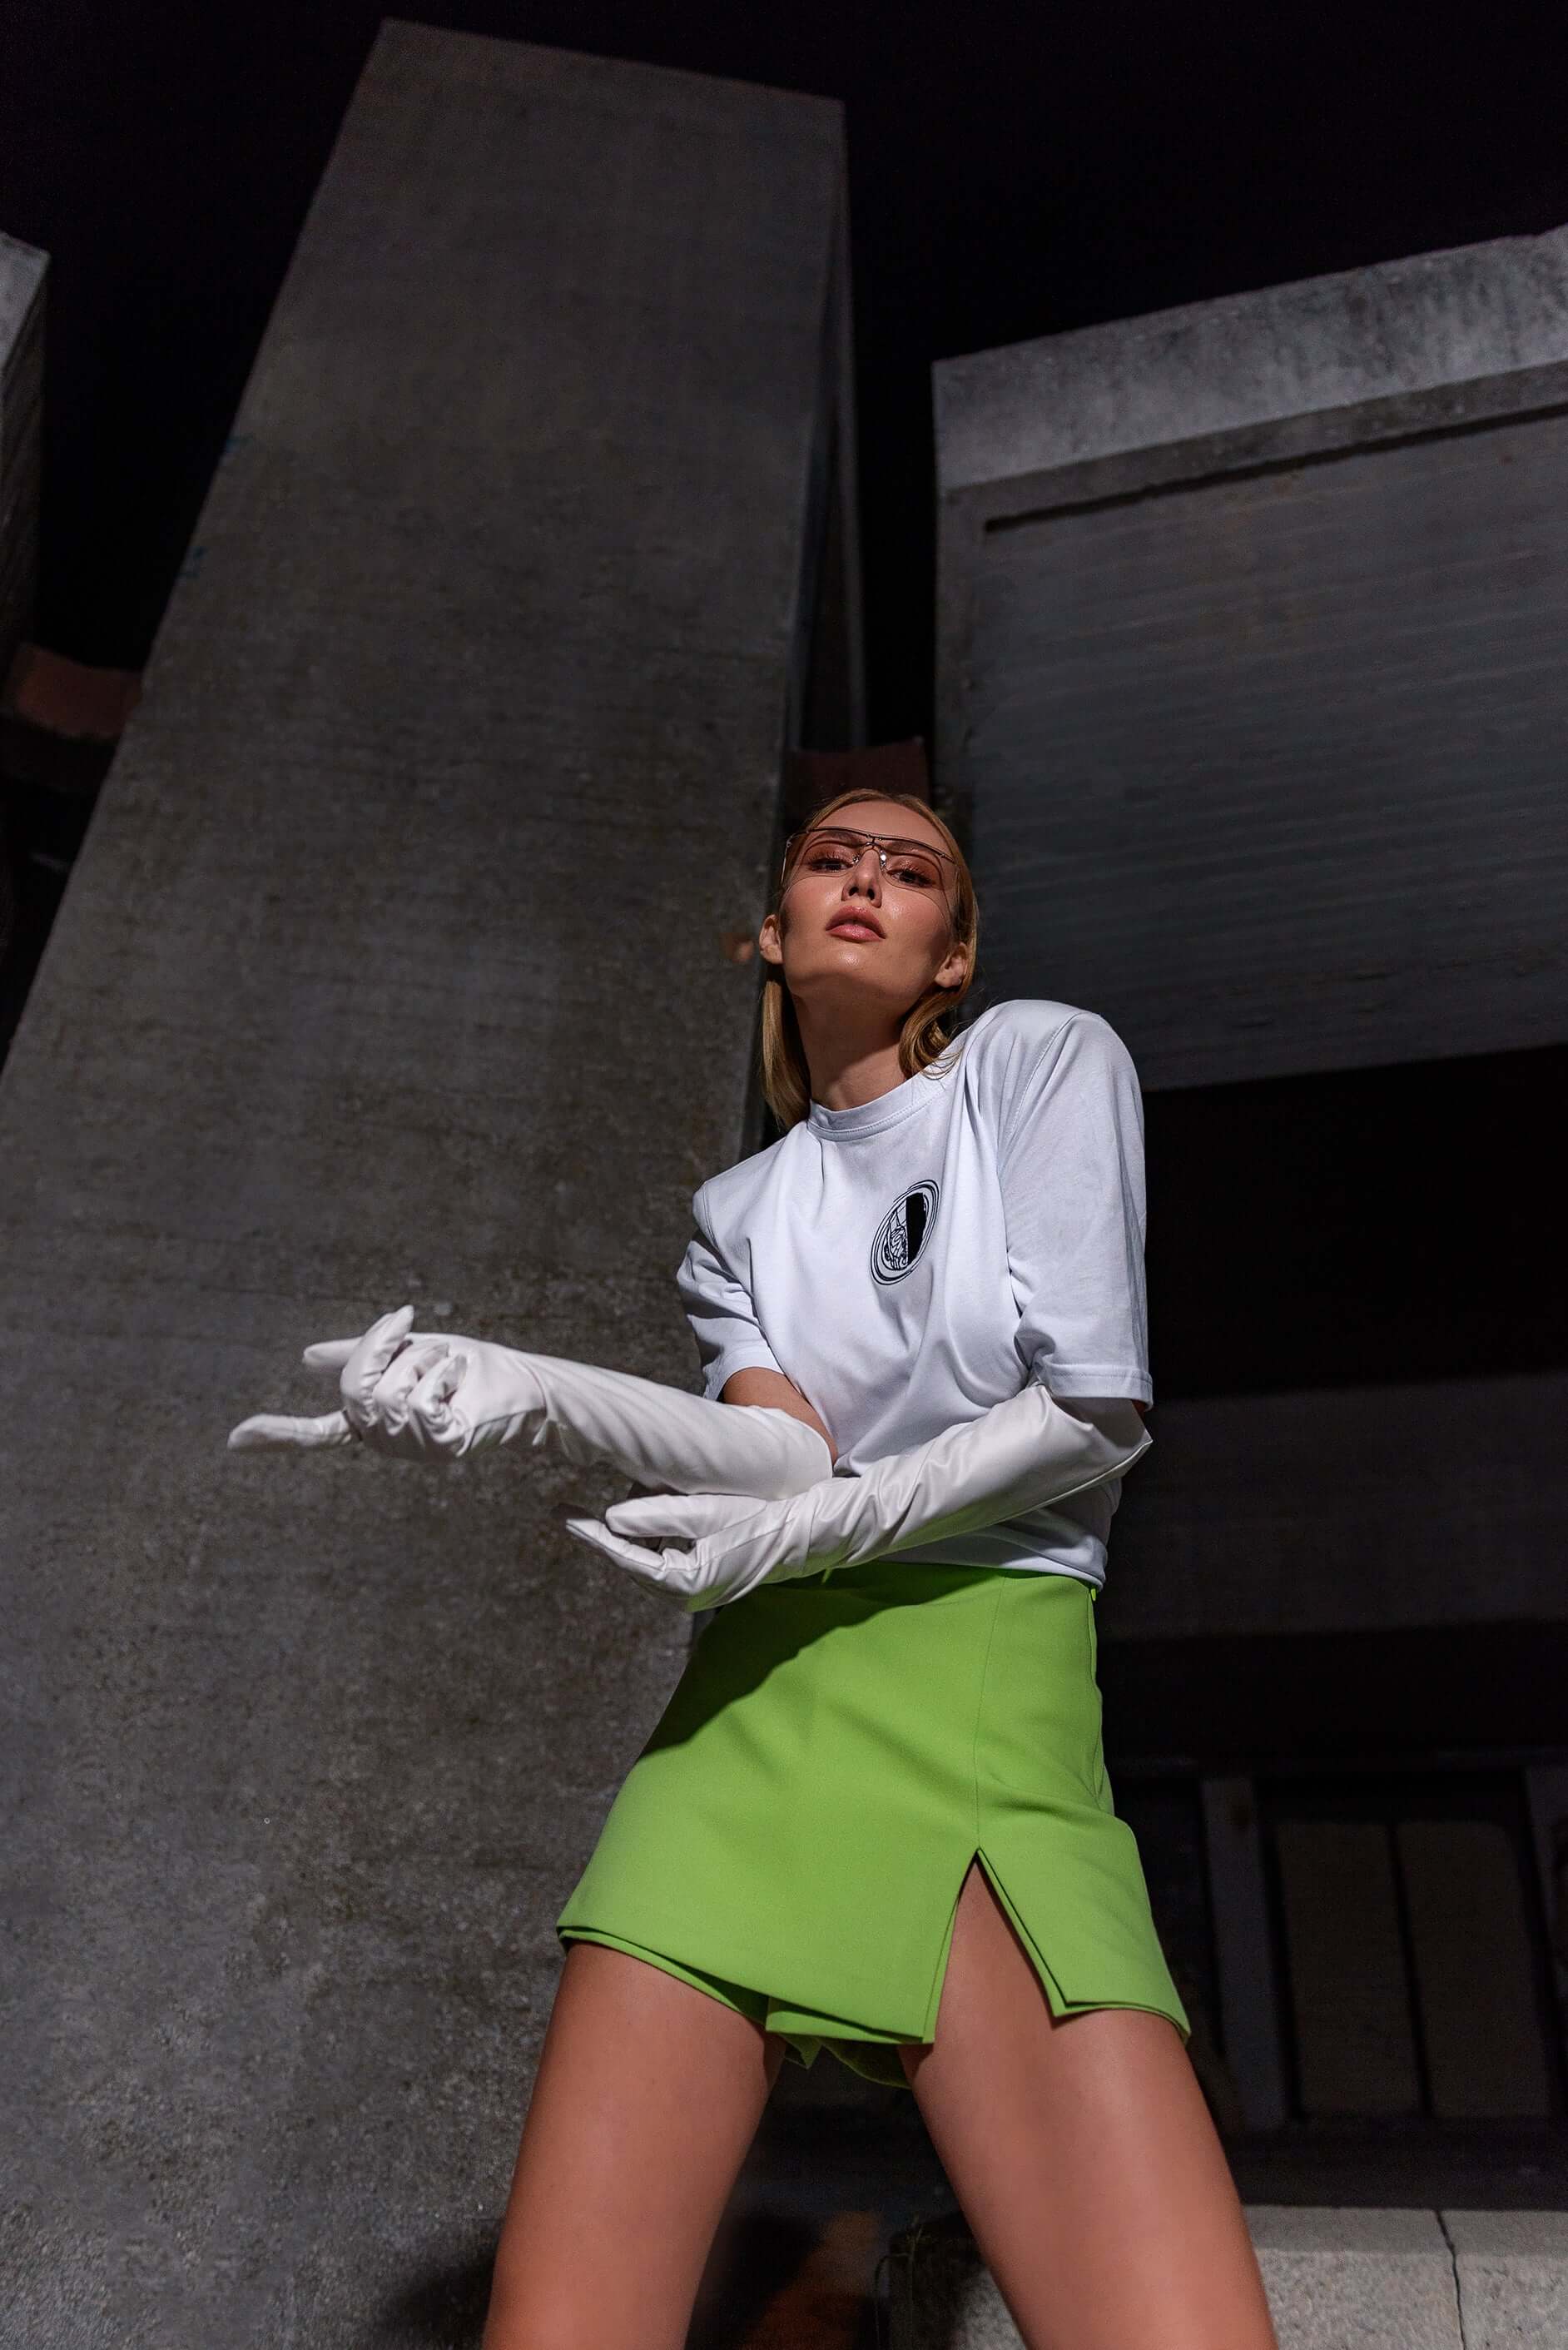 The model wears a white, oversized silhouette t-shirt with face embroidery in black. The outfit also contains a short skirt, boots and sunglasses, complimenting the white t-shirt with face embroidery. The footwear is not visible in this photograph. An editorial photograph in an architectural monument in Plovdiv, Bulgaria.